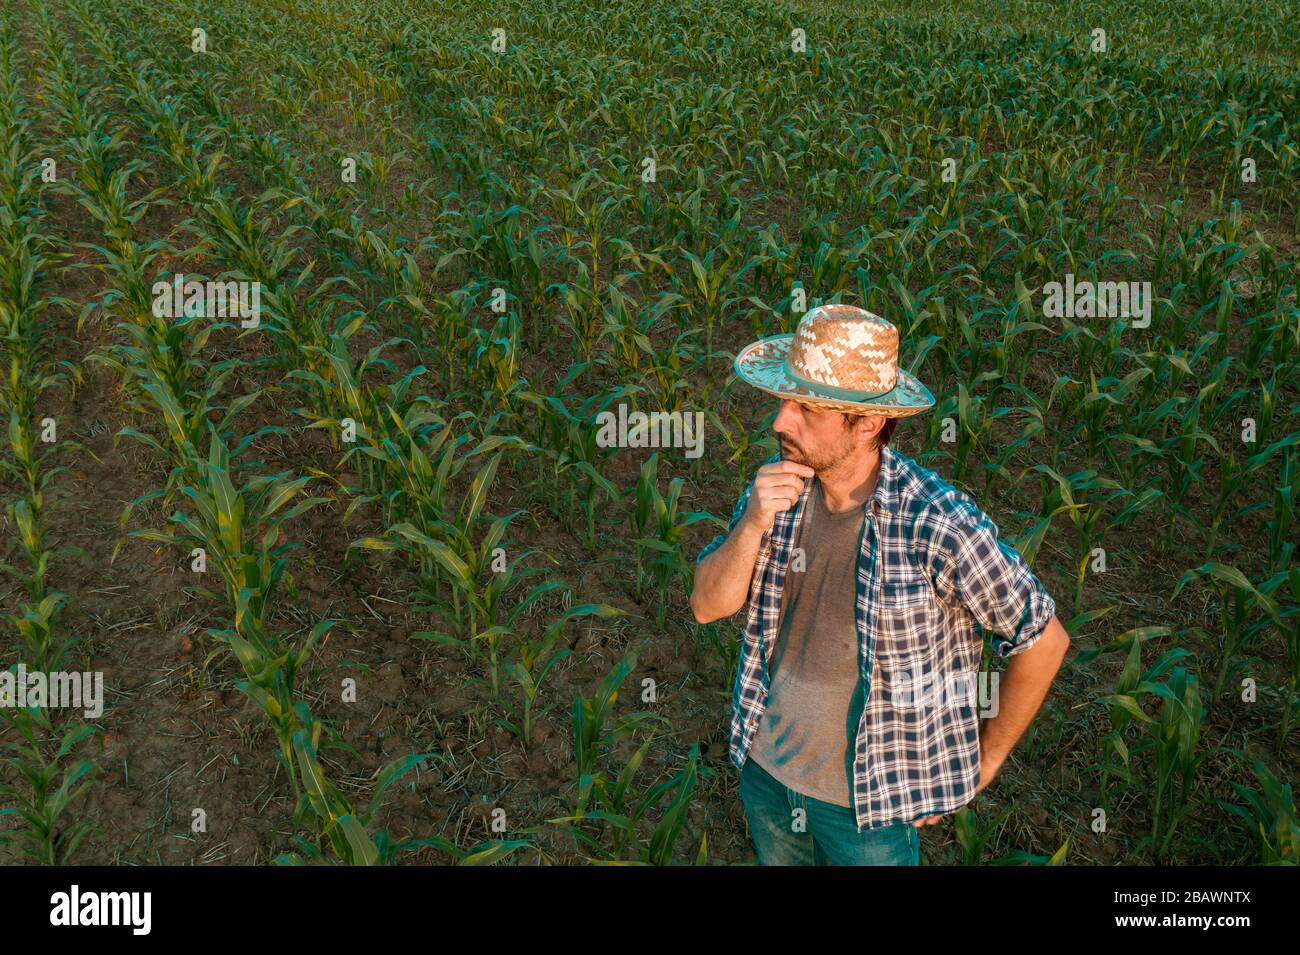 Tired exhausted farmer standing in cultivated sorghum field looking over the crops in his sweaty shirt after hardworking agricultural activity Stock Photo